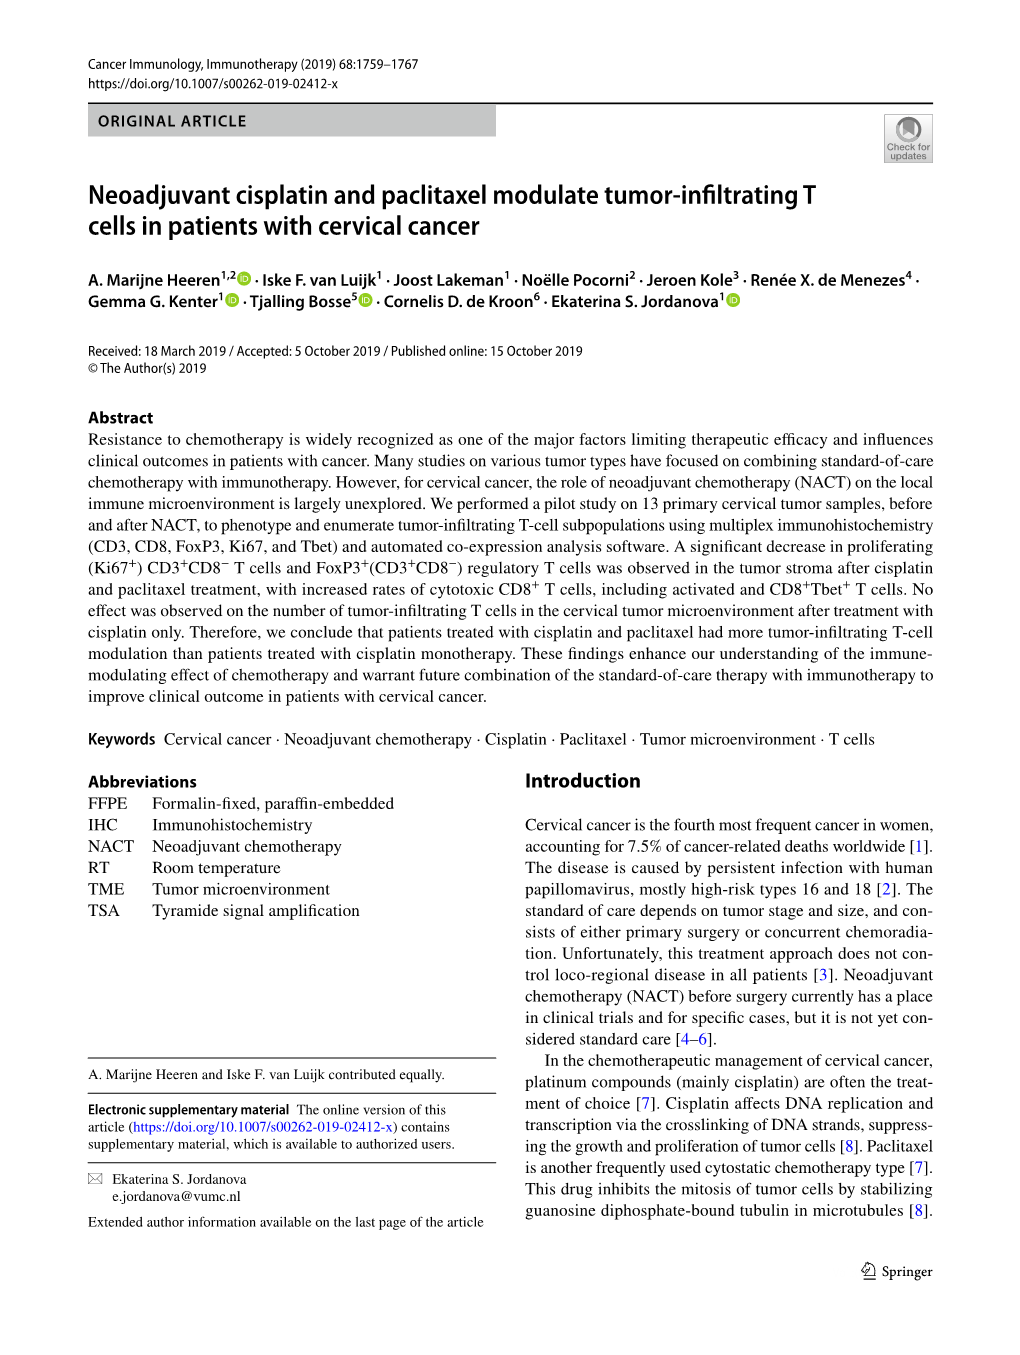 Neoadjuvant Cisplatin and Paclitaxel Modulate Tumor-Infiltrating T Cells In